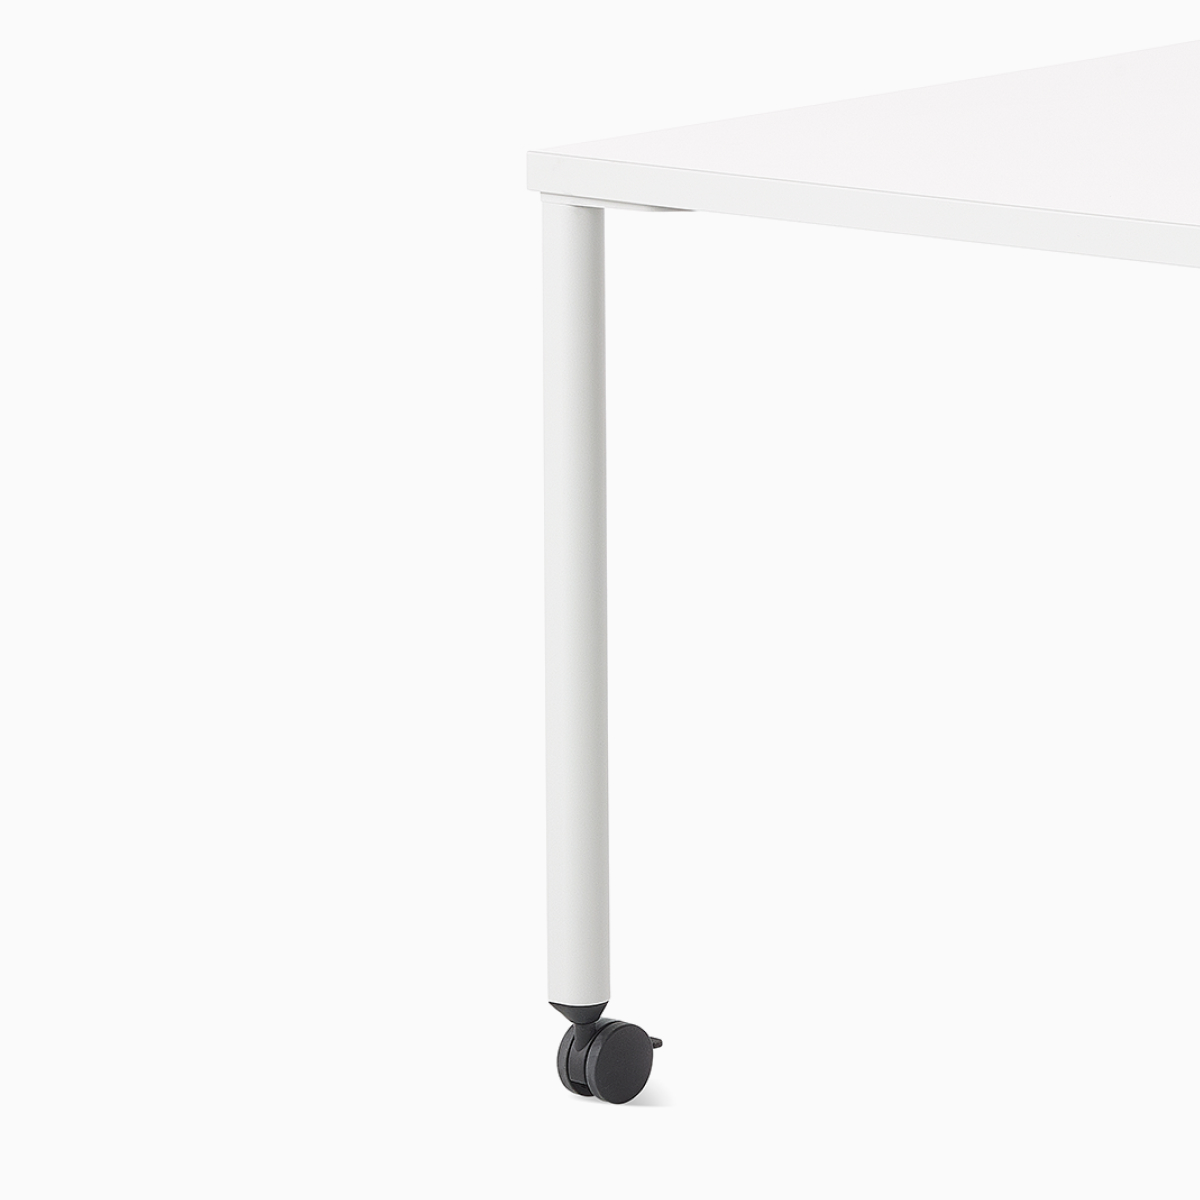 White and grey OE1 Project Table with casters, viewed from an angle.